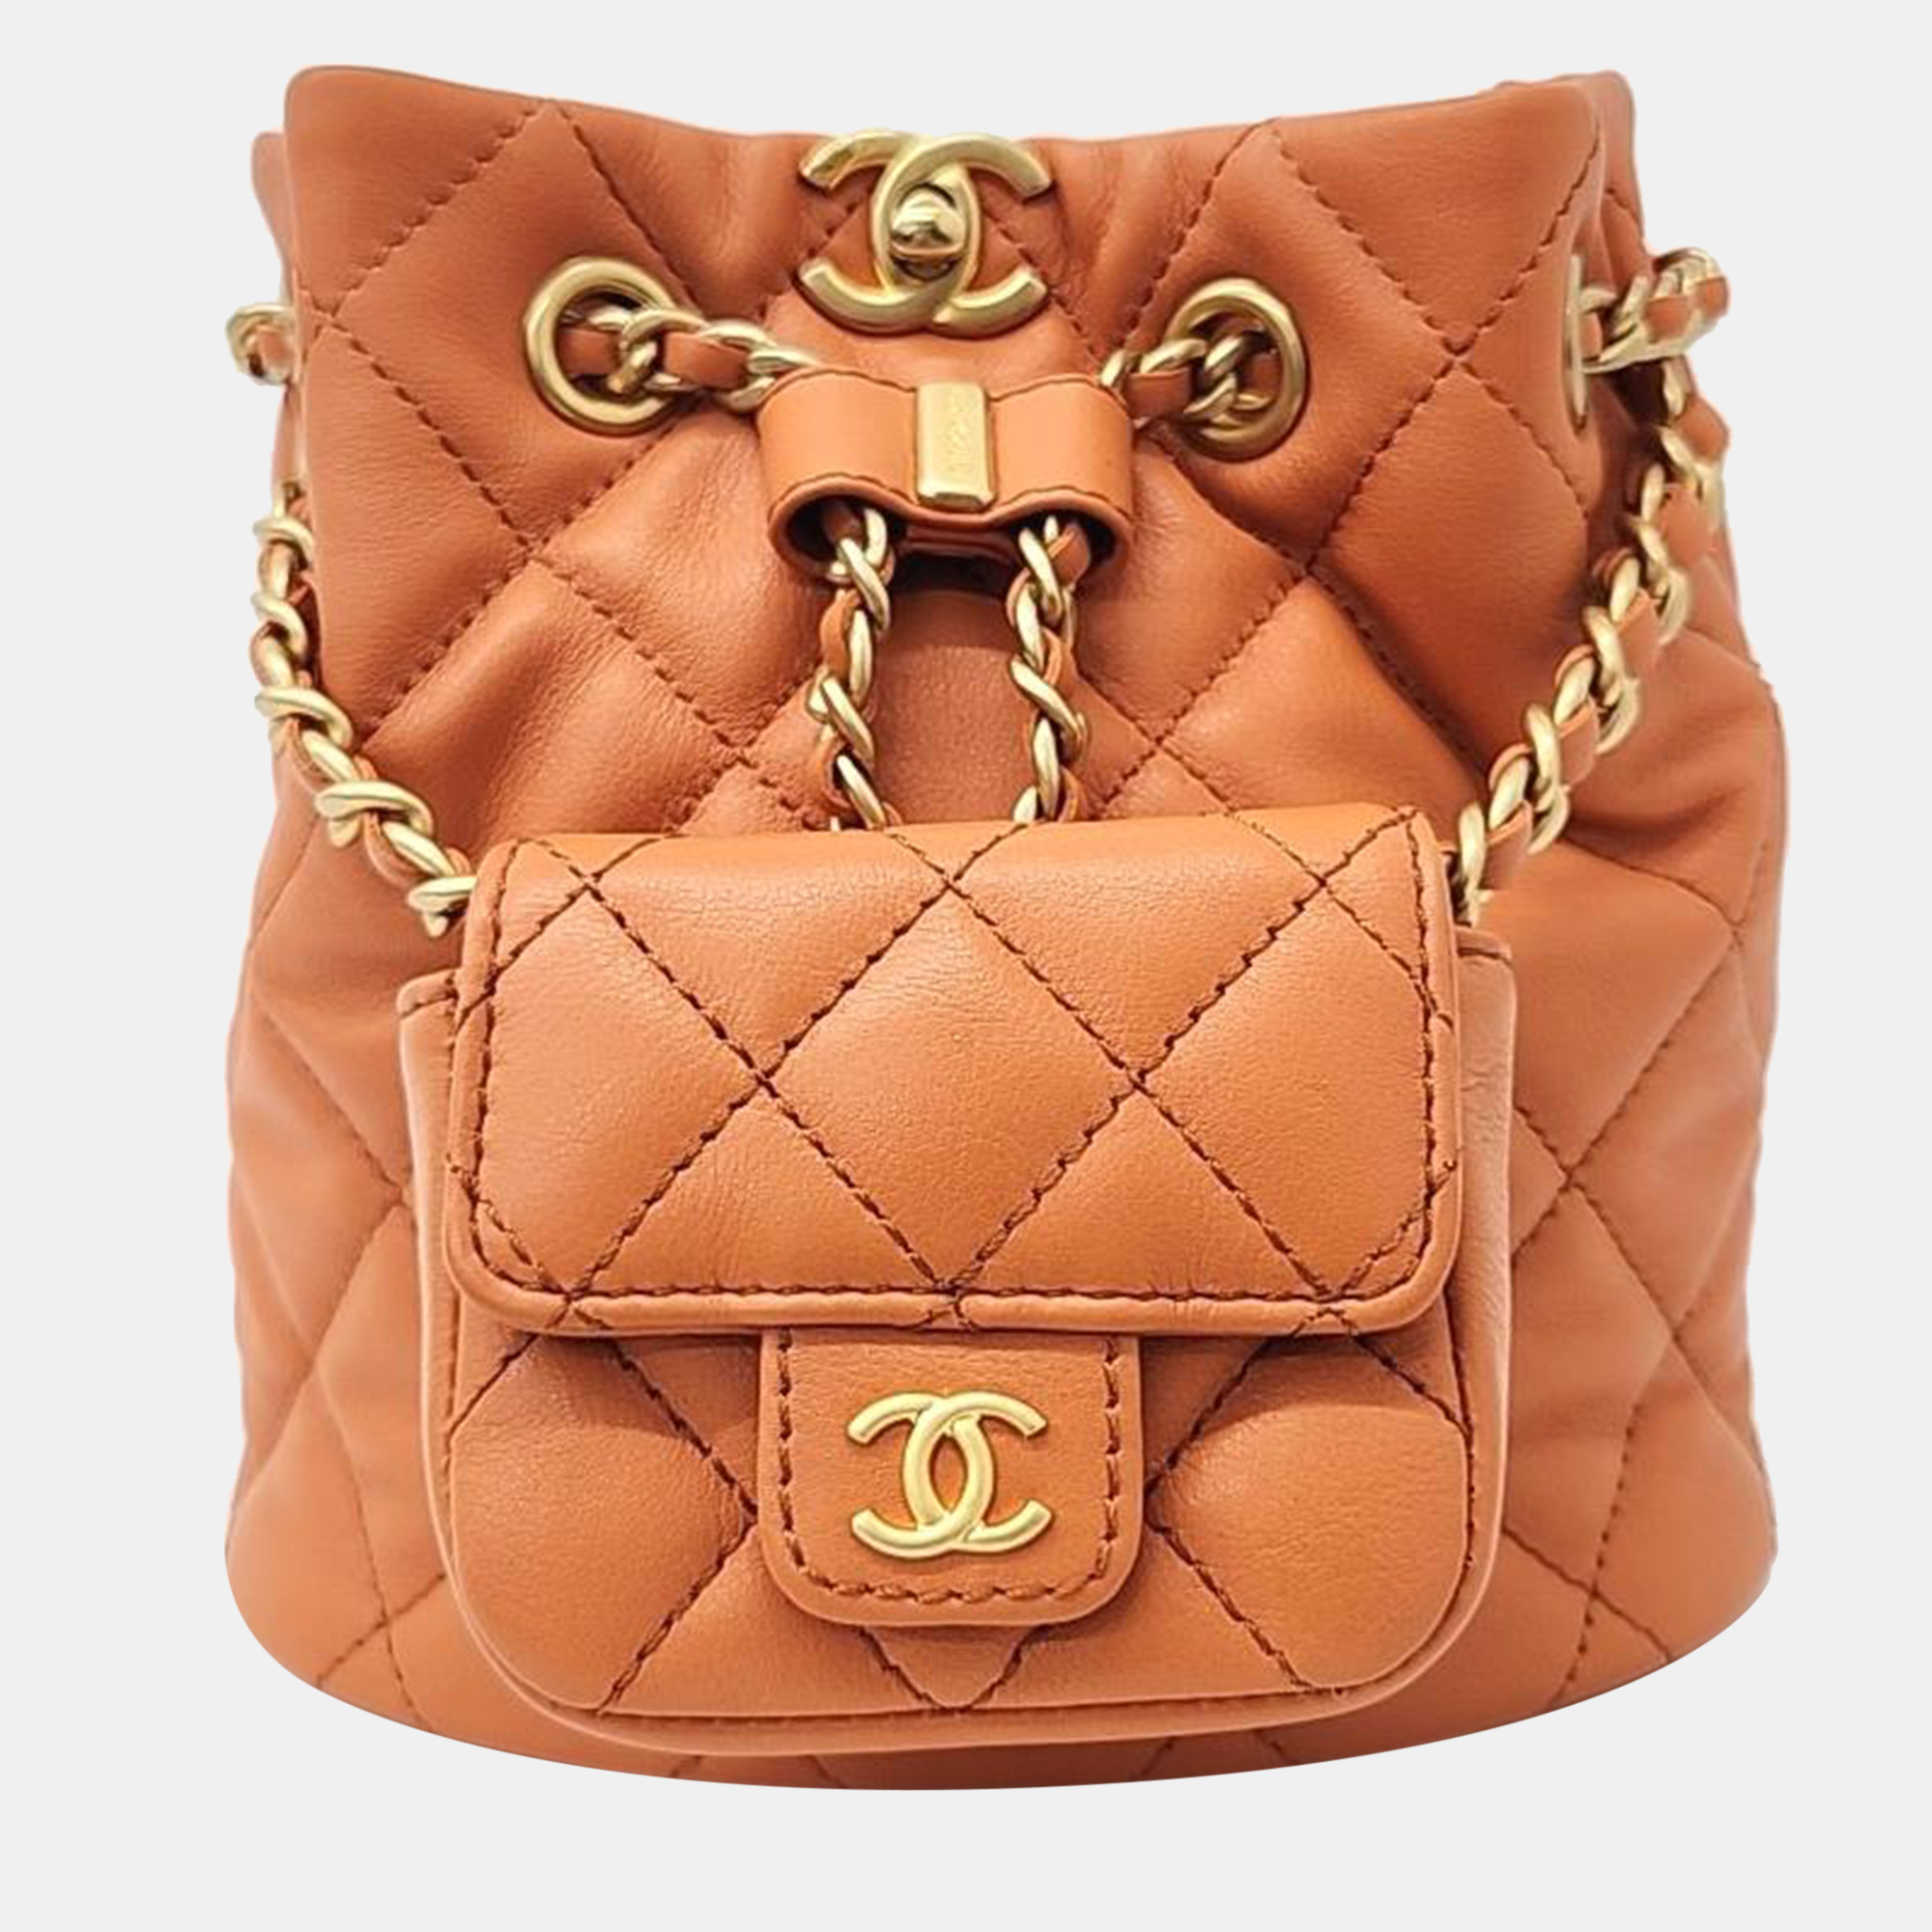 Chanel orange leather small backpack